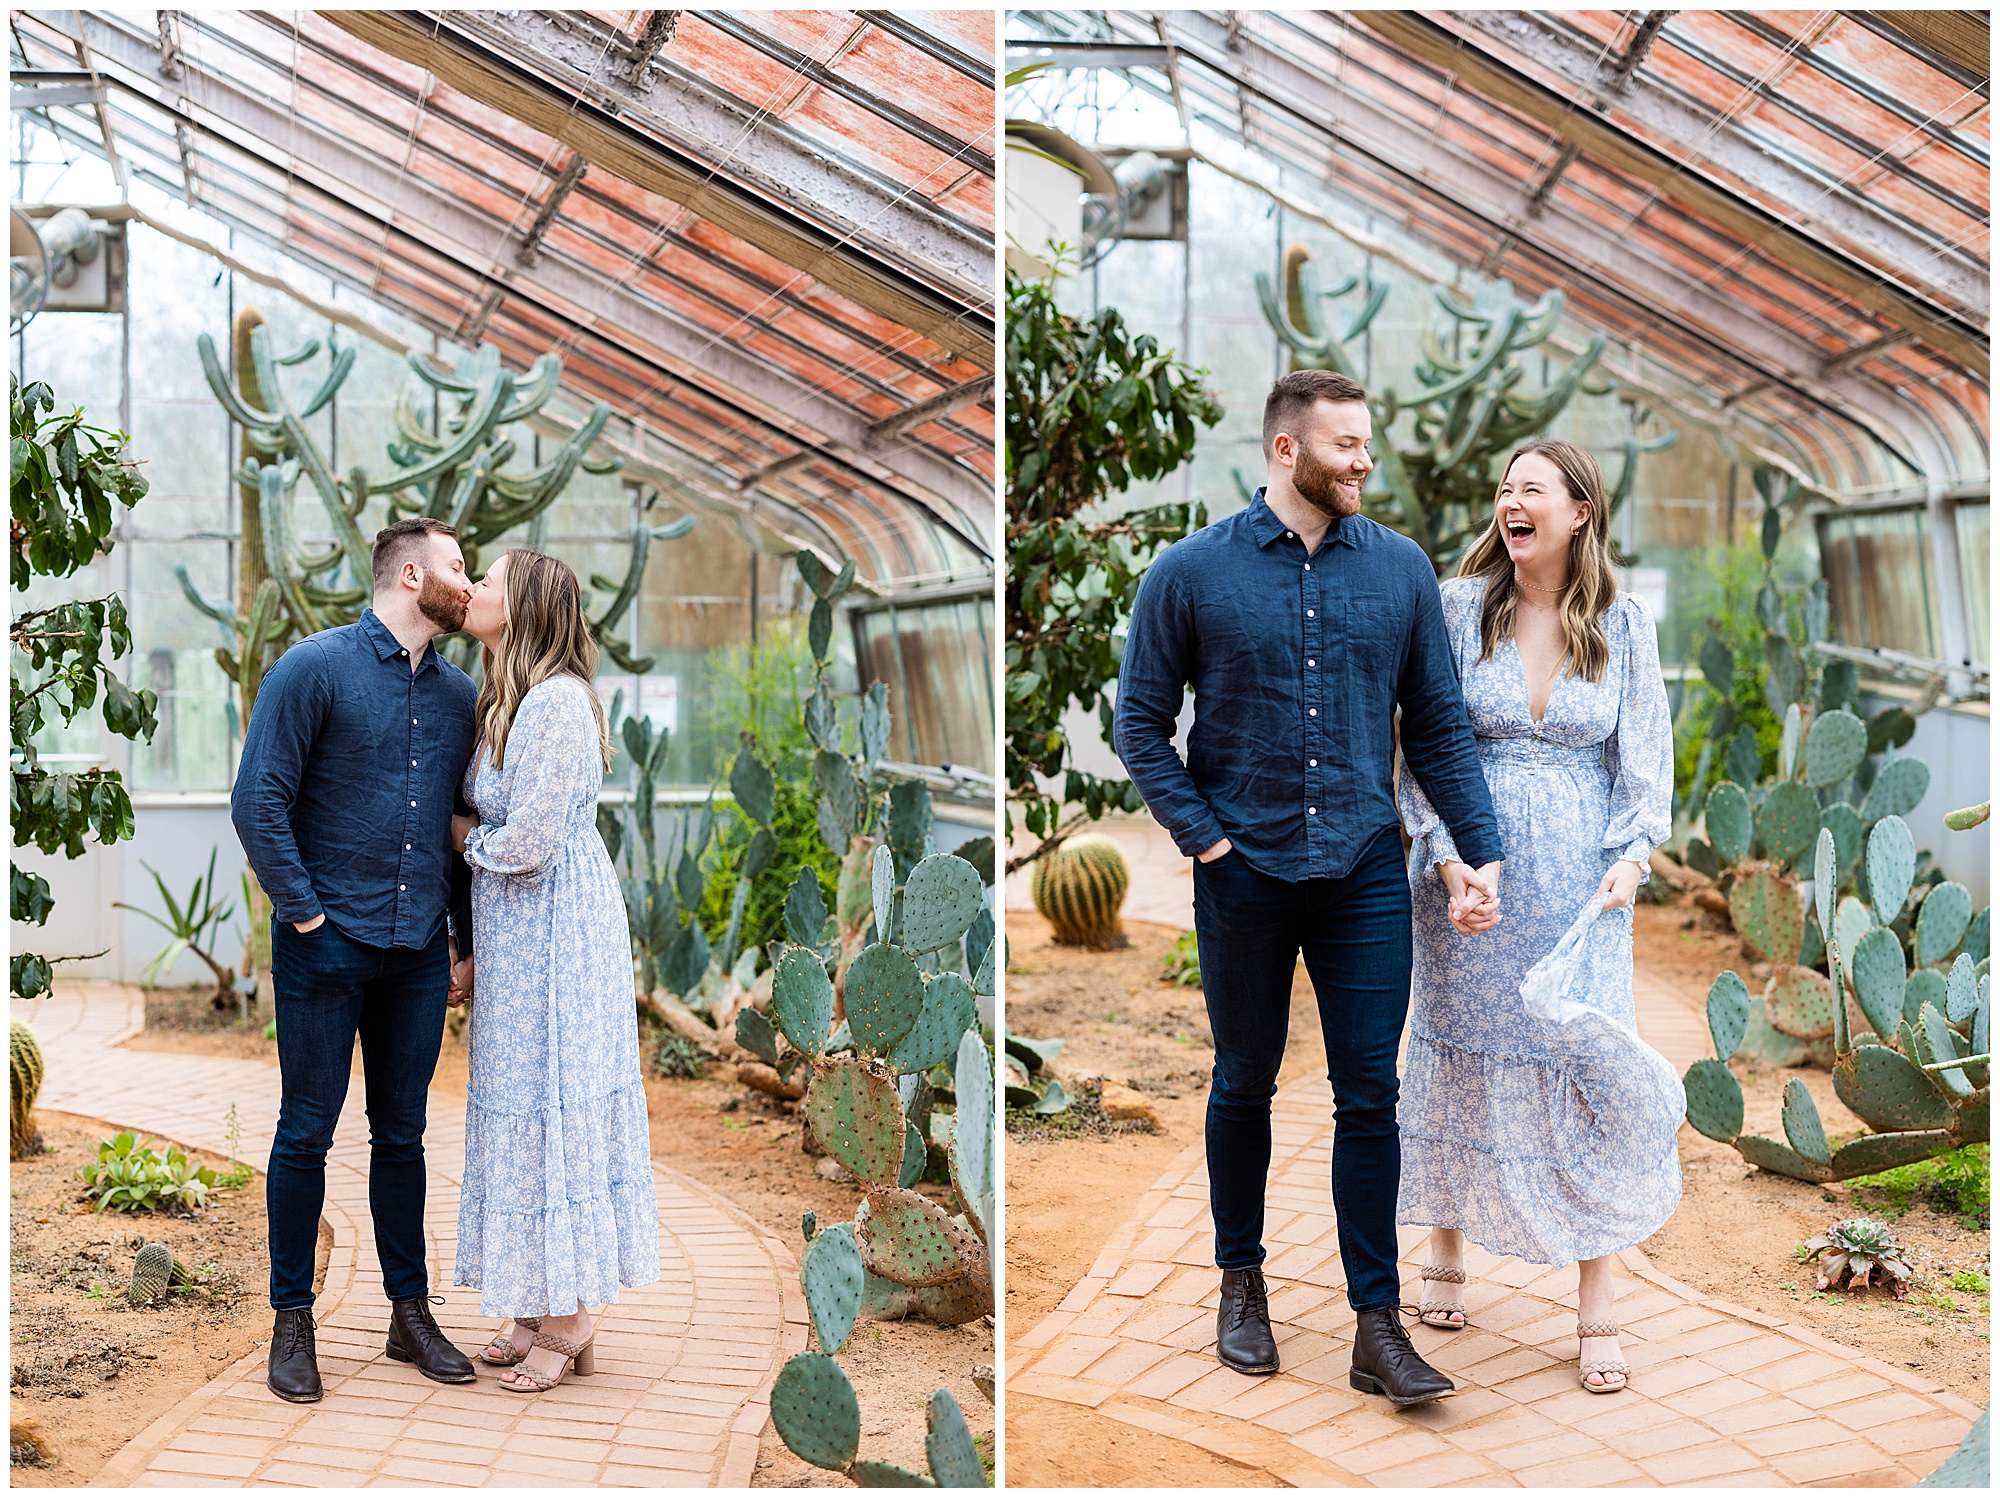 Eleanor Stenner Photography - a Birmingham, AL wedding photographer - photographs the Whitenecks in her Valentine's Day Mini Sessions